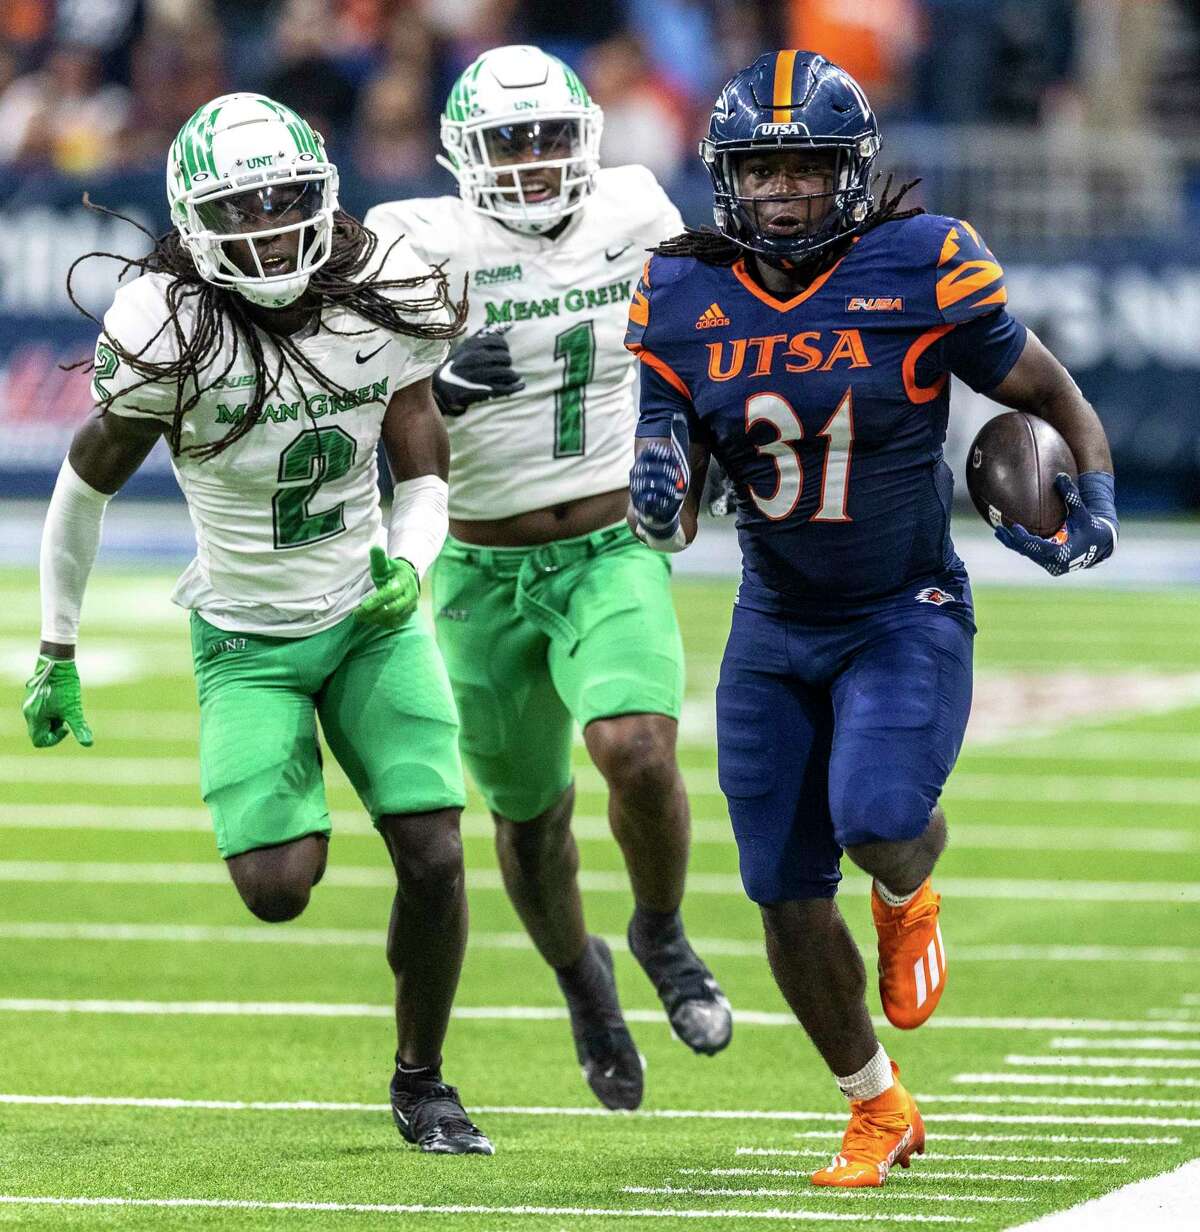 UTSA Roadrunners running back Kevorian Barnes (31) rushes the sideline Friday night, Dec. 2, 2022 at the Alamodome while North Texas Mean Green quarterback Austin Aune (2) and North Texas Mean Green linebacker KD Davis (1) try to chase him down during the C-USA championship game.